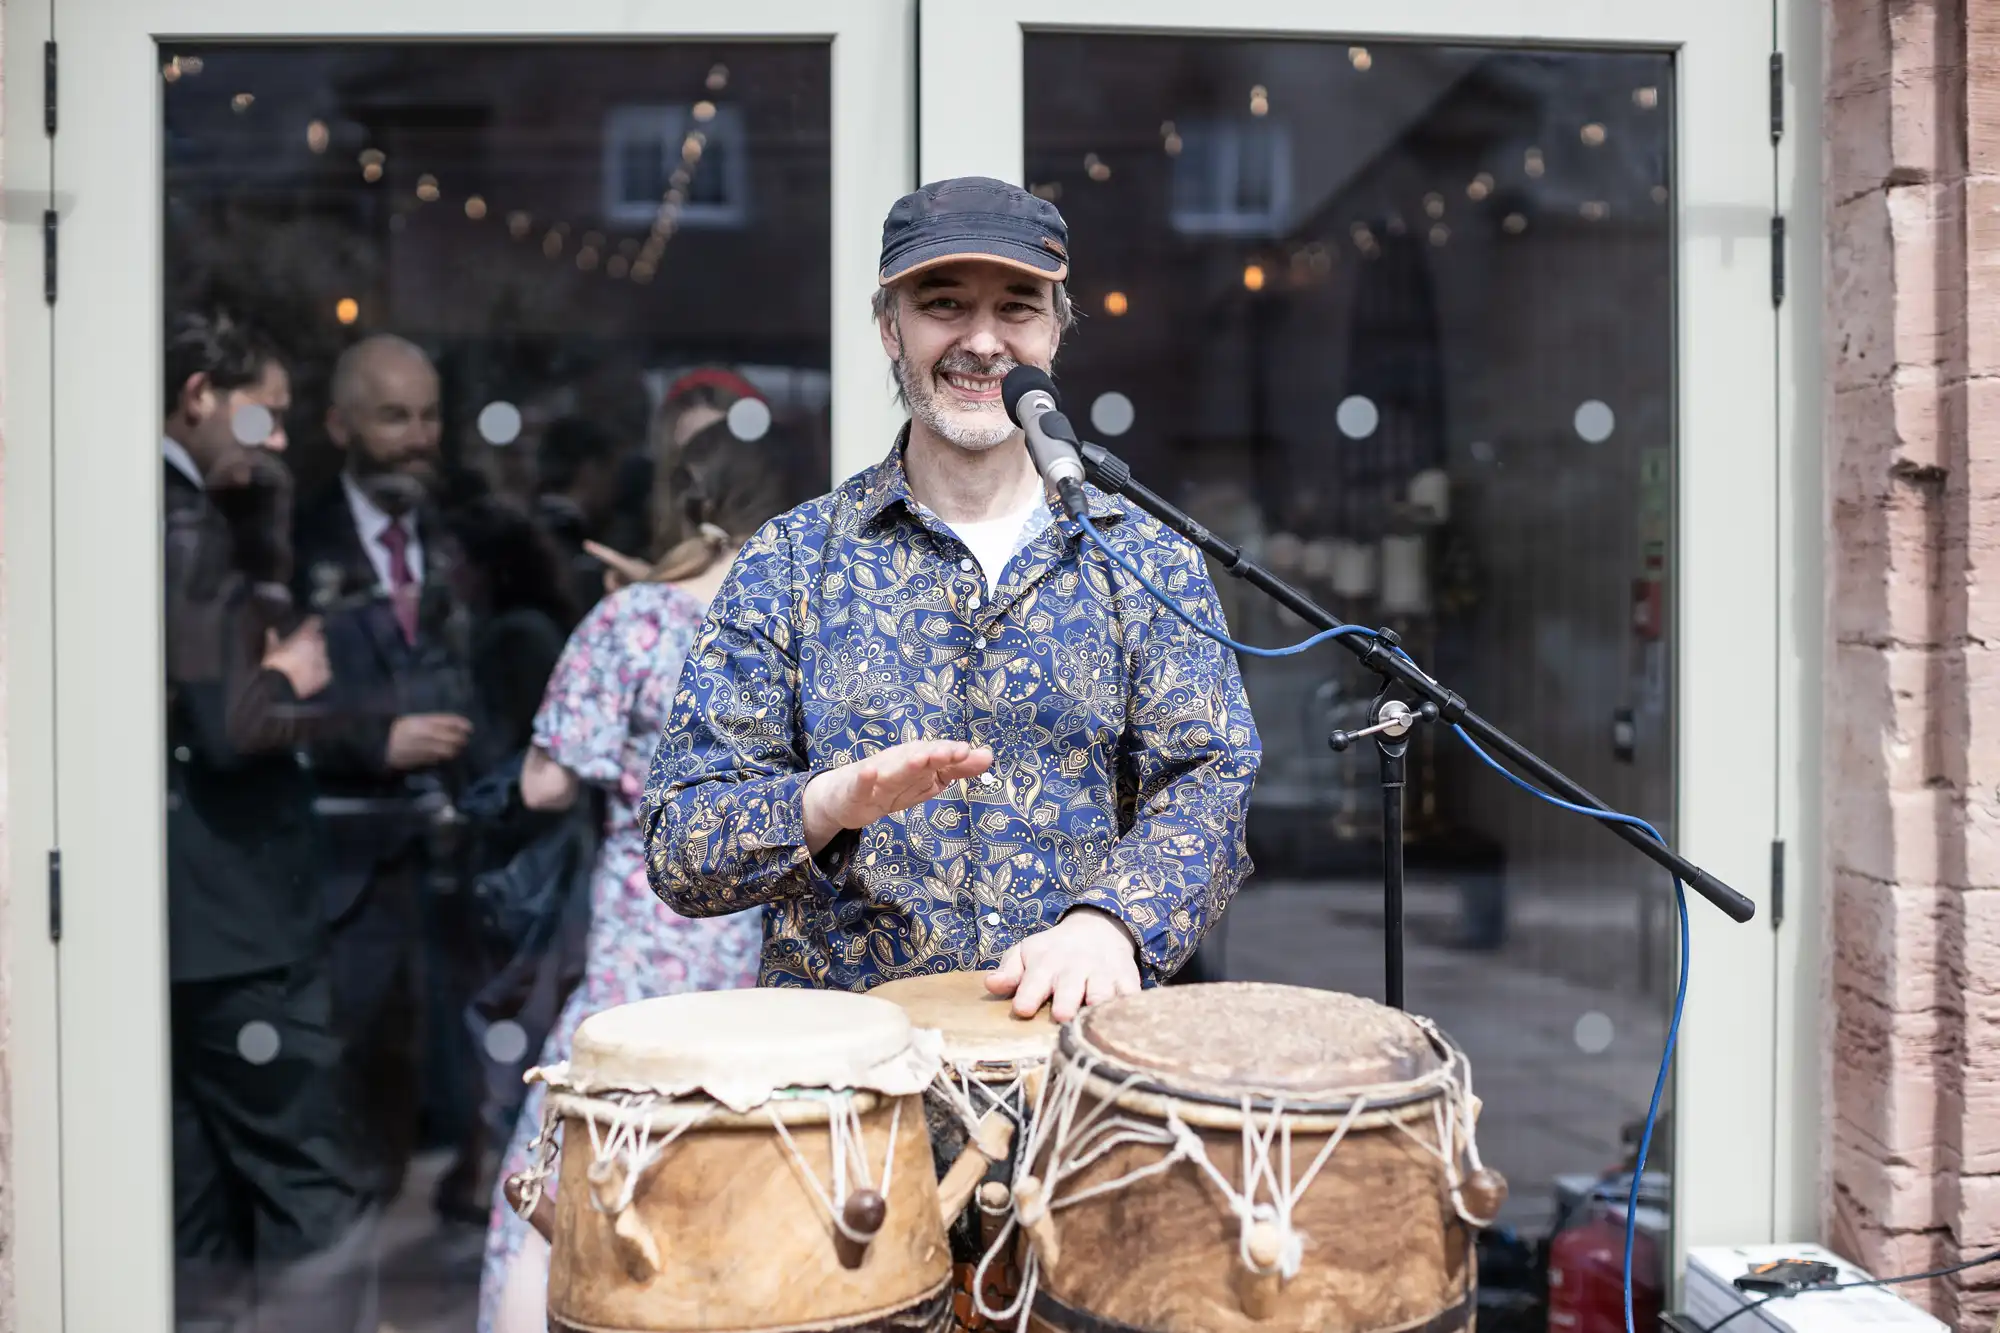 A man wearing a patterned shirt and cap is playing conga drums and smiling at a microphone in front of a glass door. People are conversing in the background.